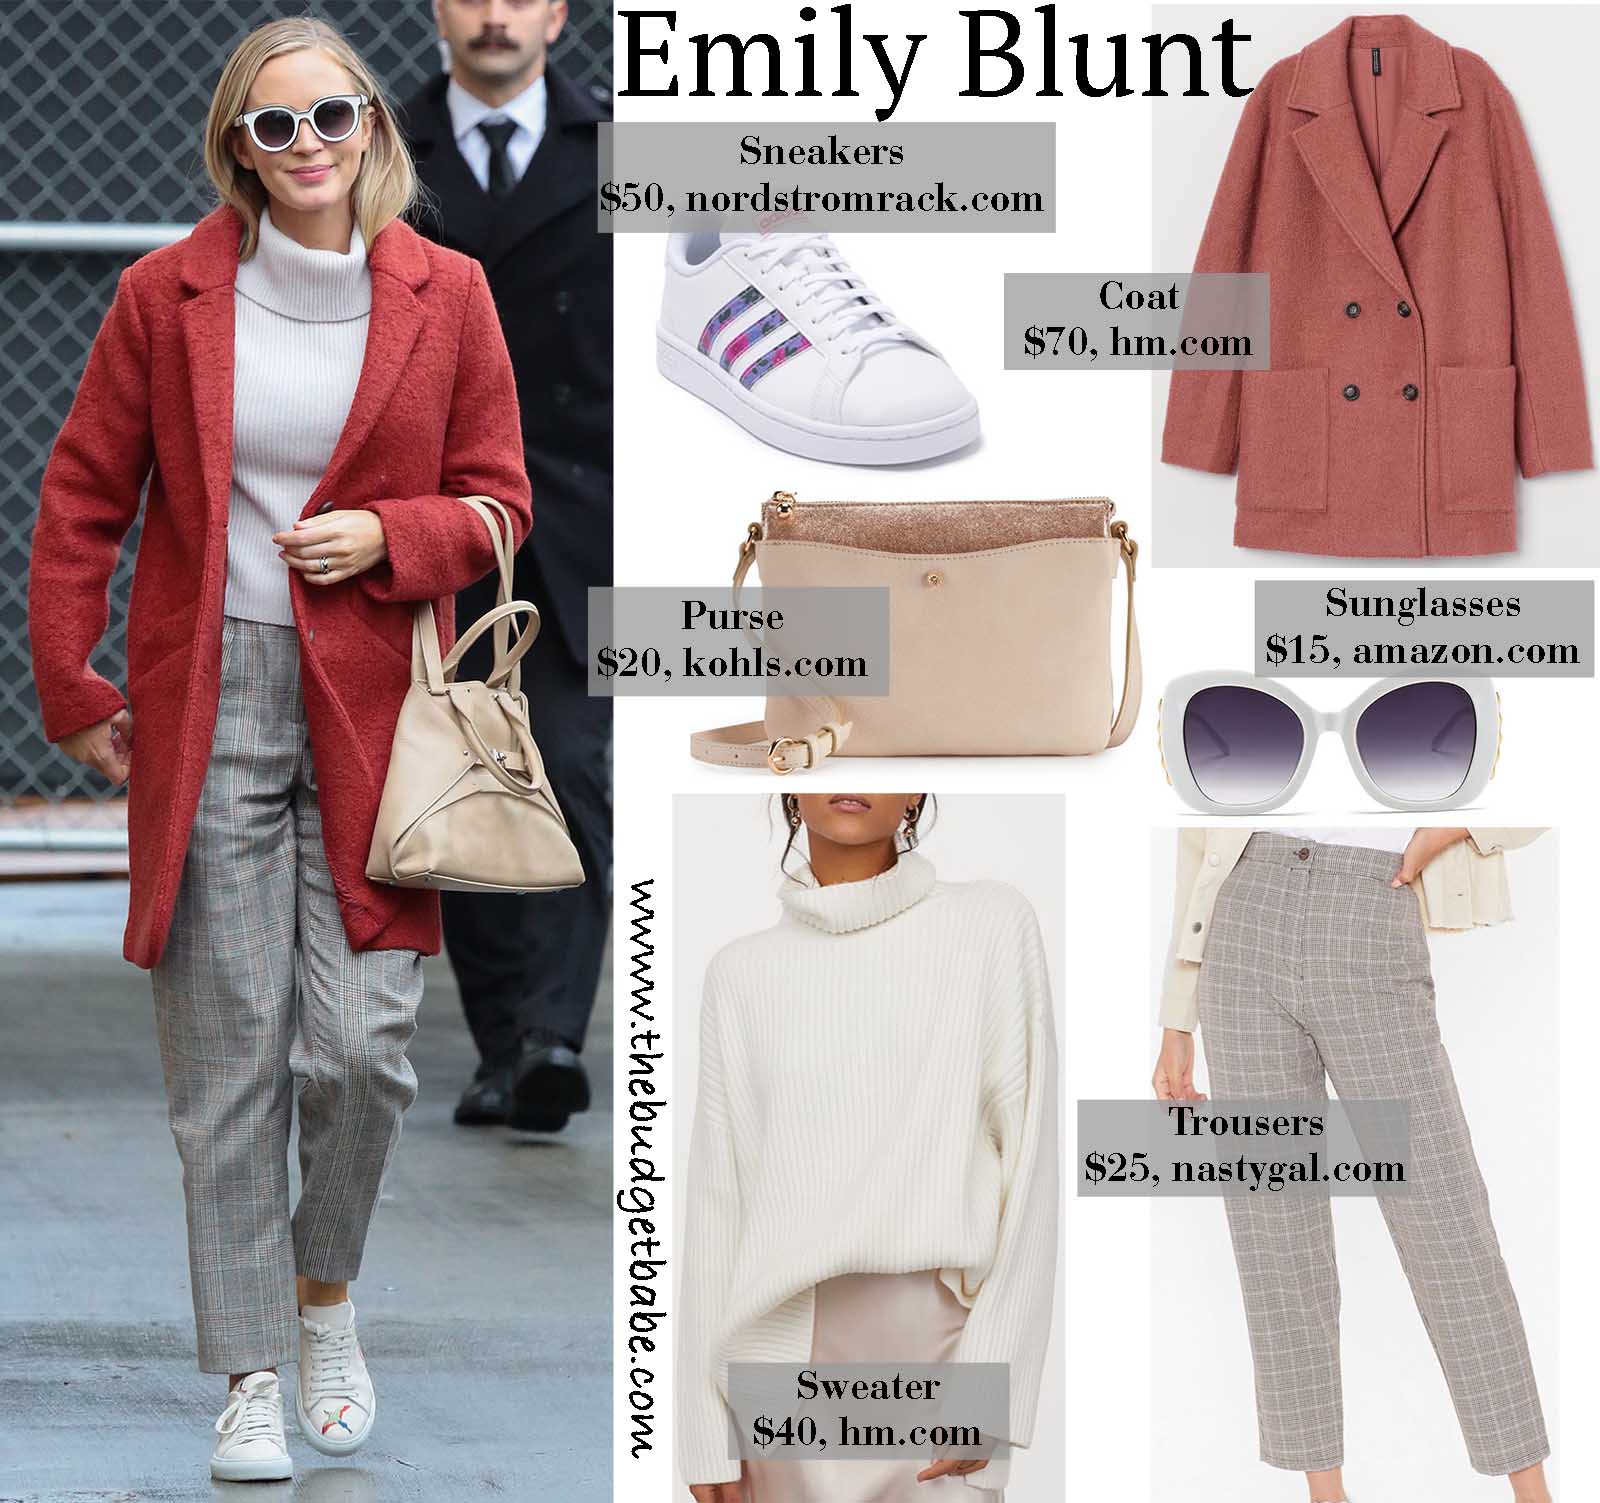 Emily Blunt stays warms in a cheery rose coat!